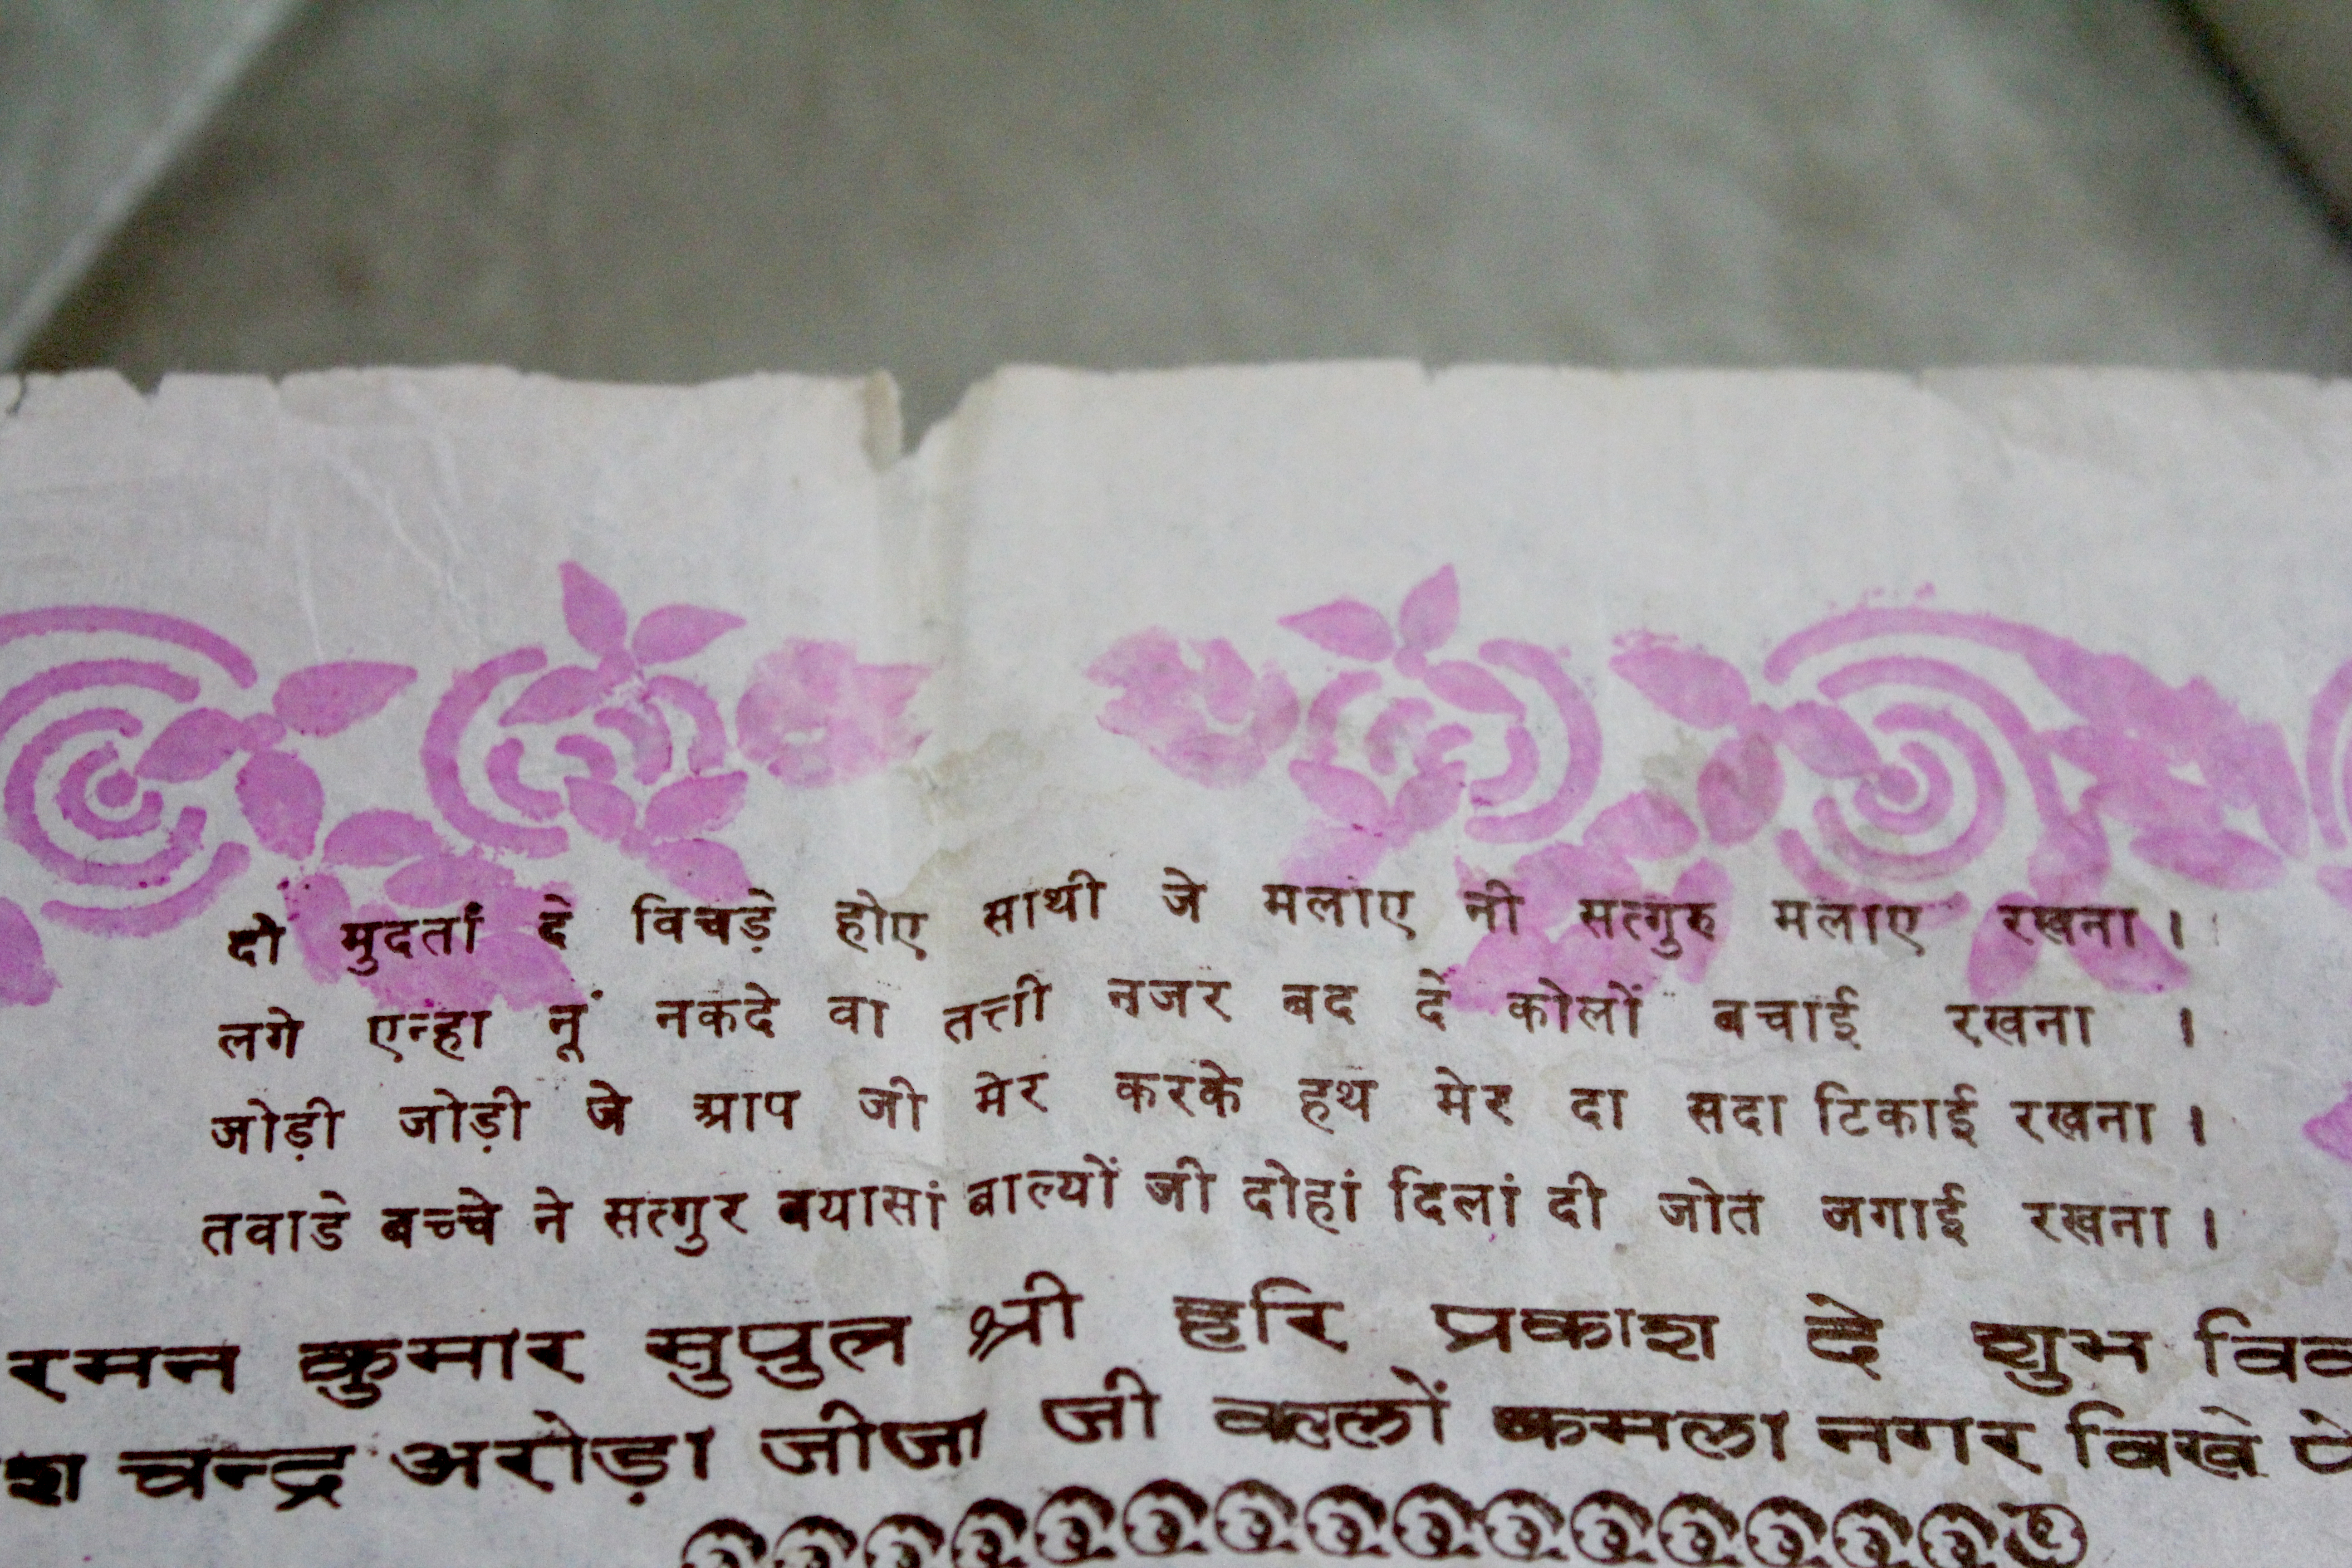 a short four-line verse which requests God, the Satguru, to bless the couple